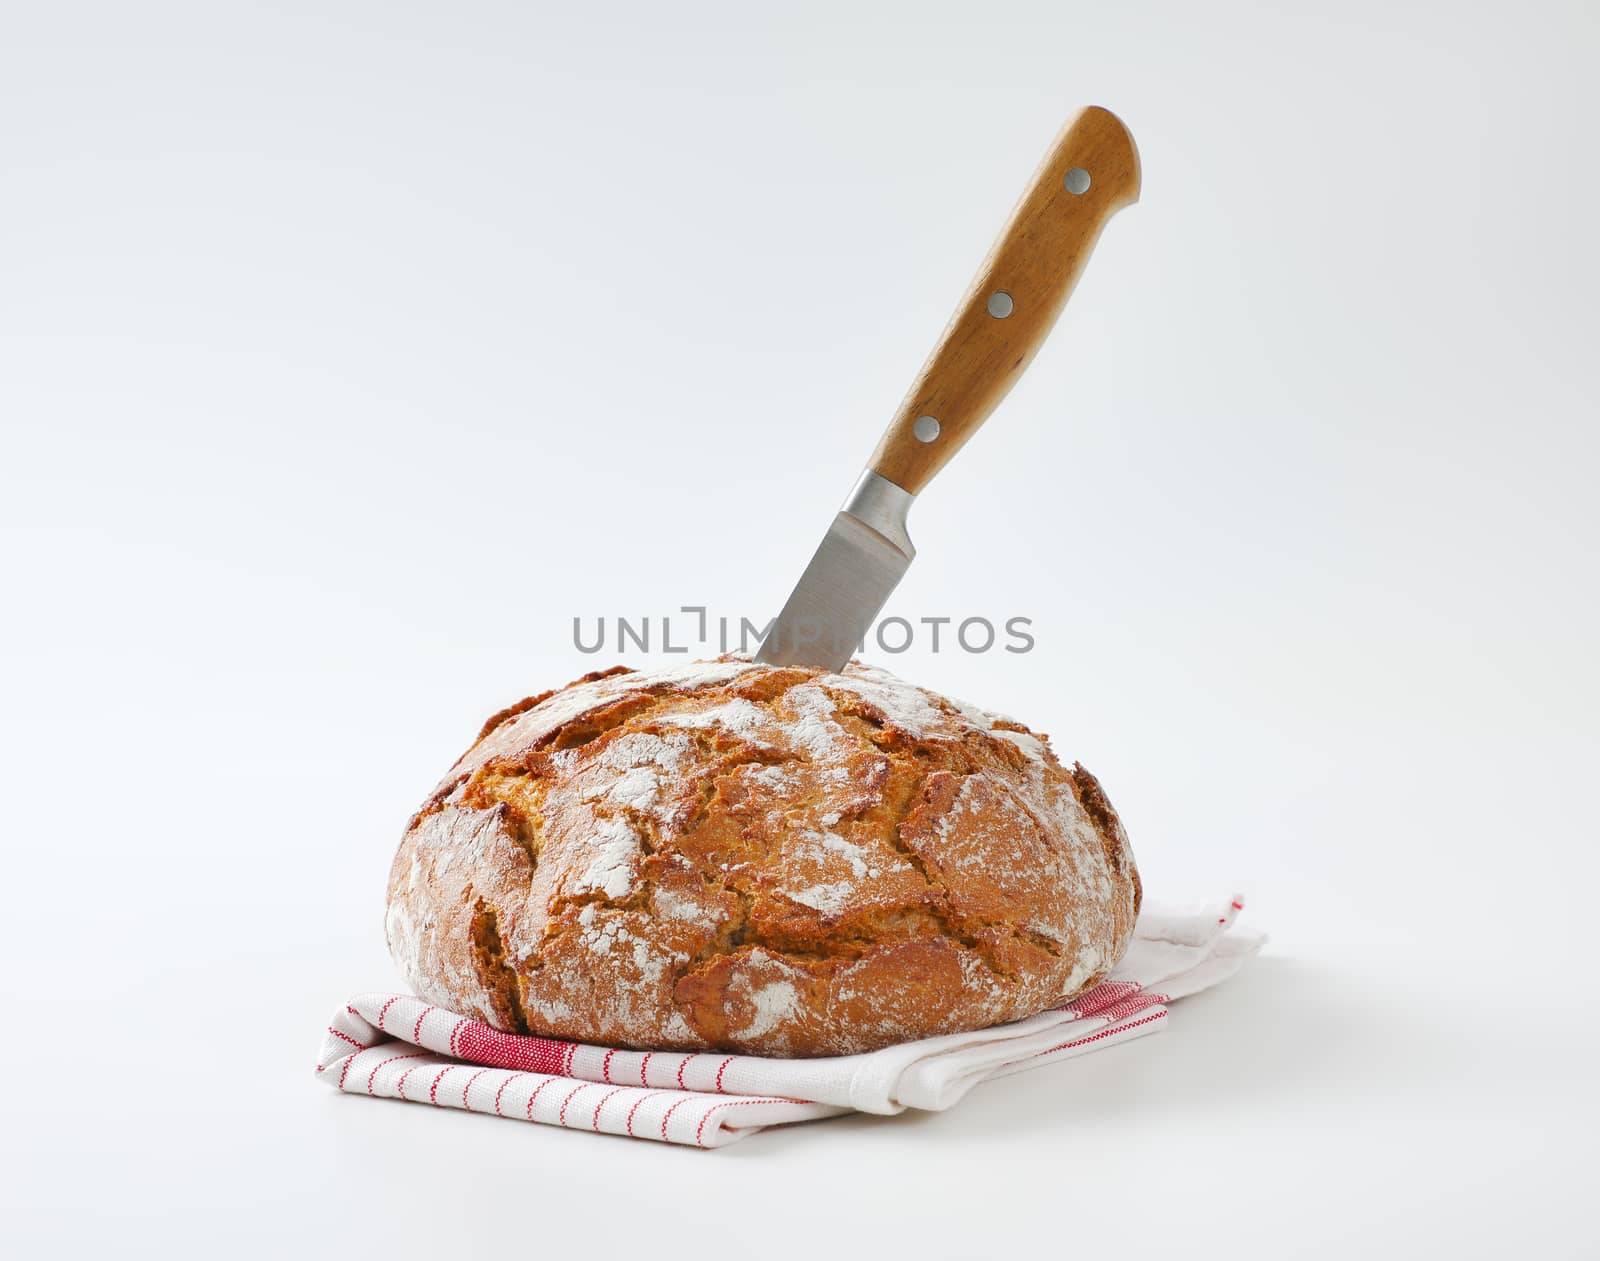 Loaf of rustic bread with a knife stuck in it